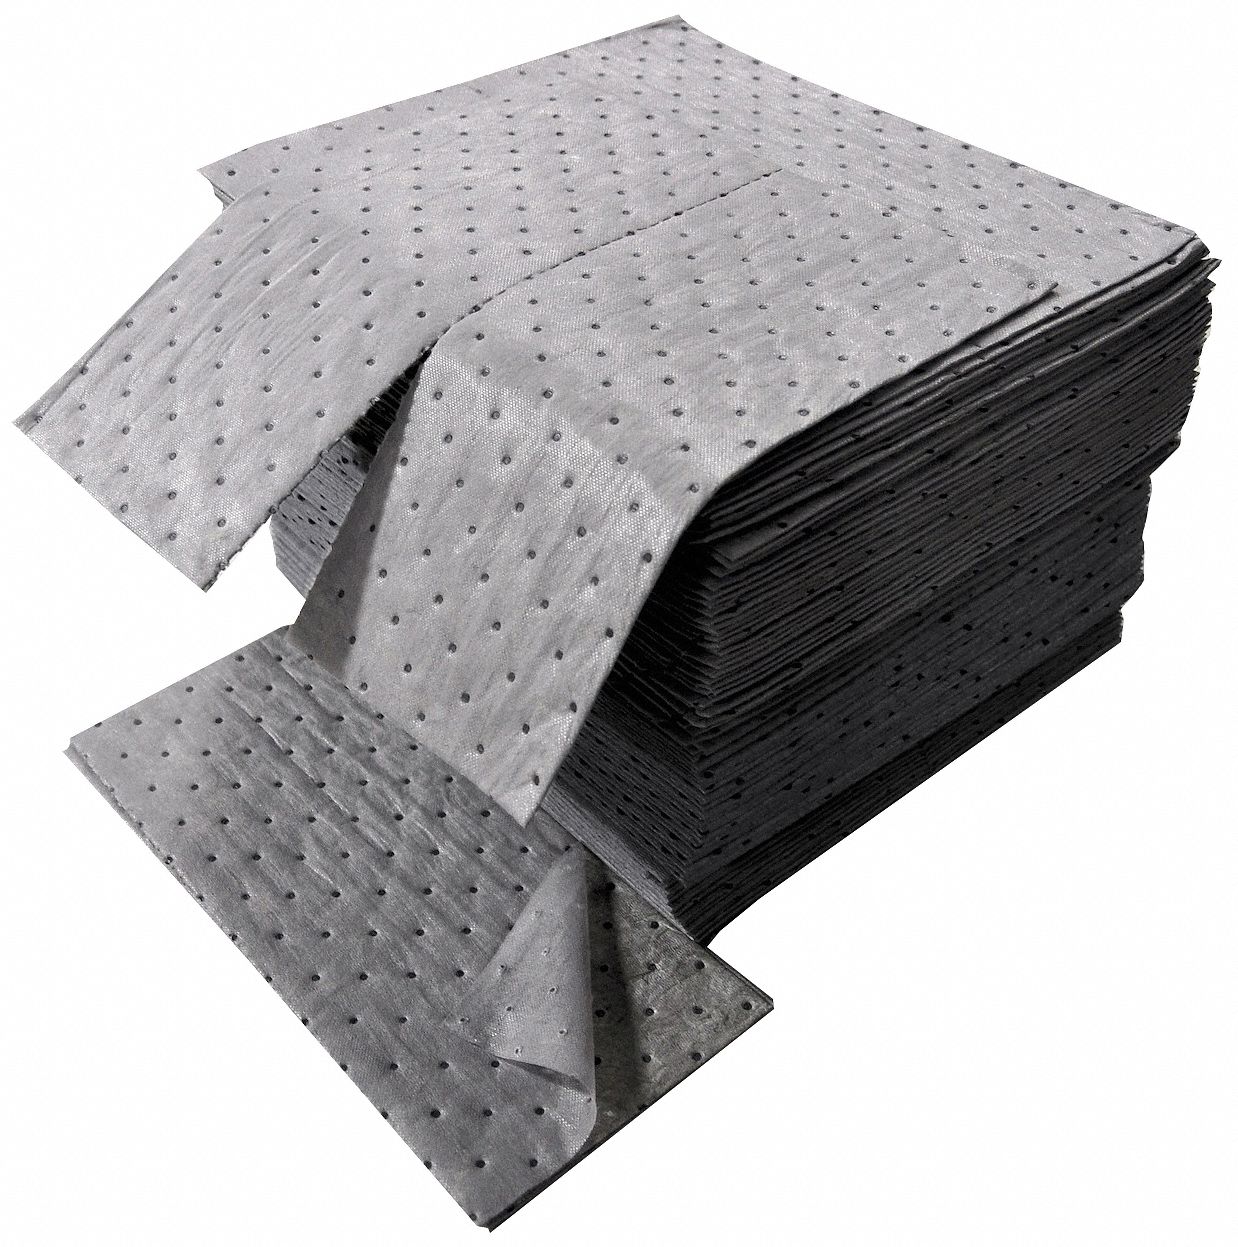 Case of 100 Automotive Interior Protection88-100-100PK Universal Absorbant Industrial Strength Pad, 